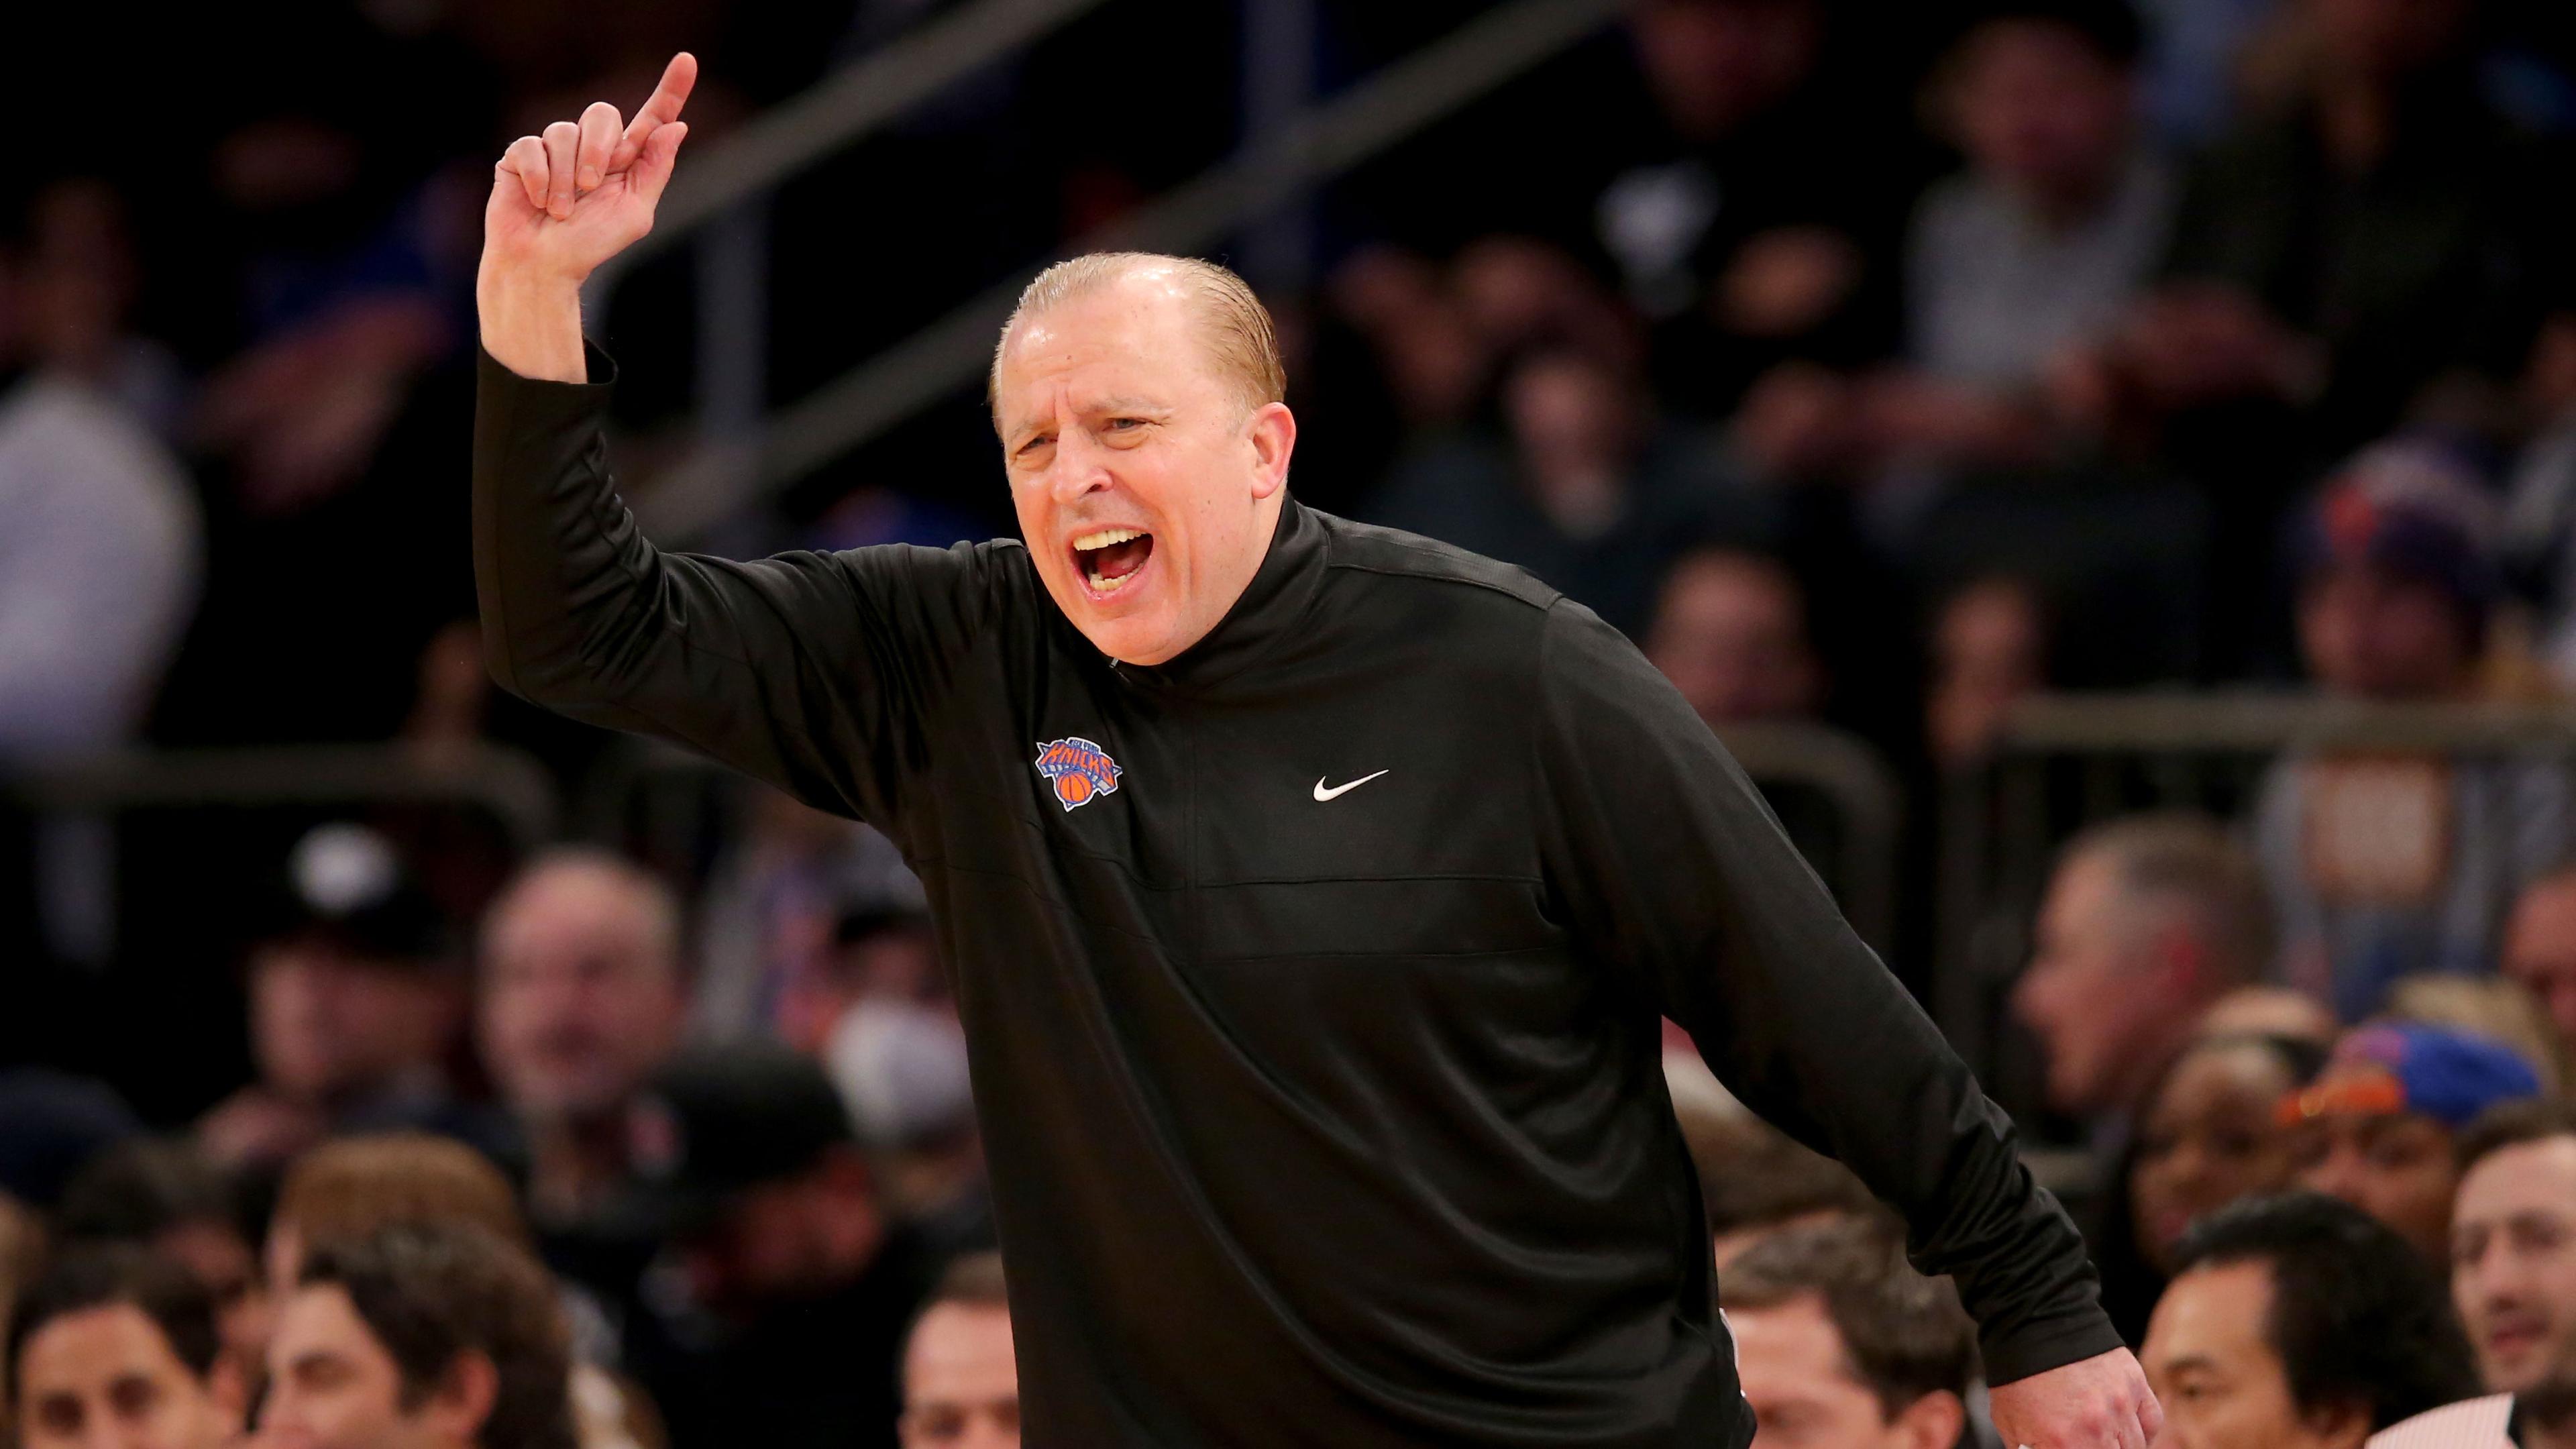 Feb 16, 2022; New York, New York, USA; New York Knicks head coach Tom Thibodeau coaches against the Brooklyn Nets during the first quarter at Madison Square Garden. / Brad Penner-USA TODAY Sports